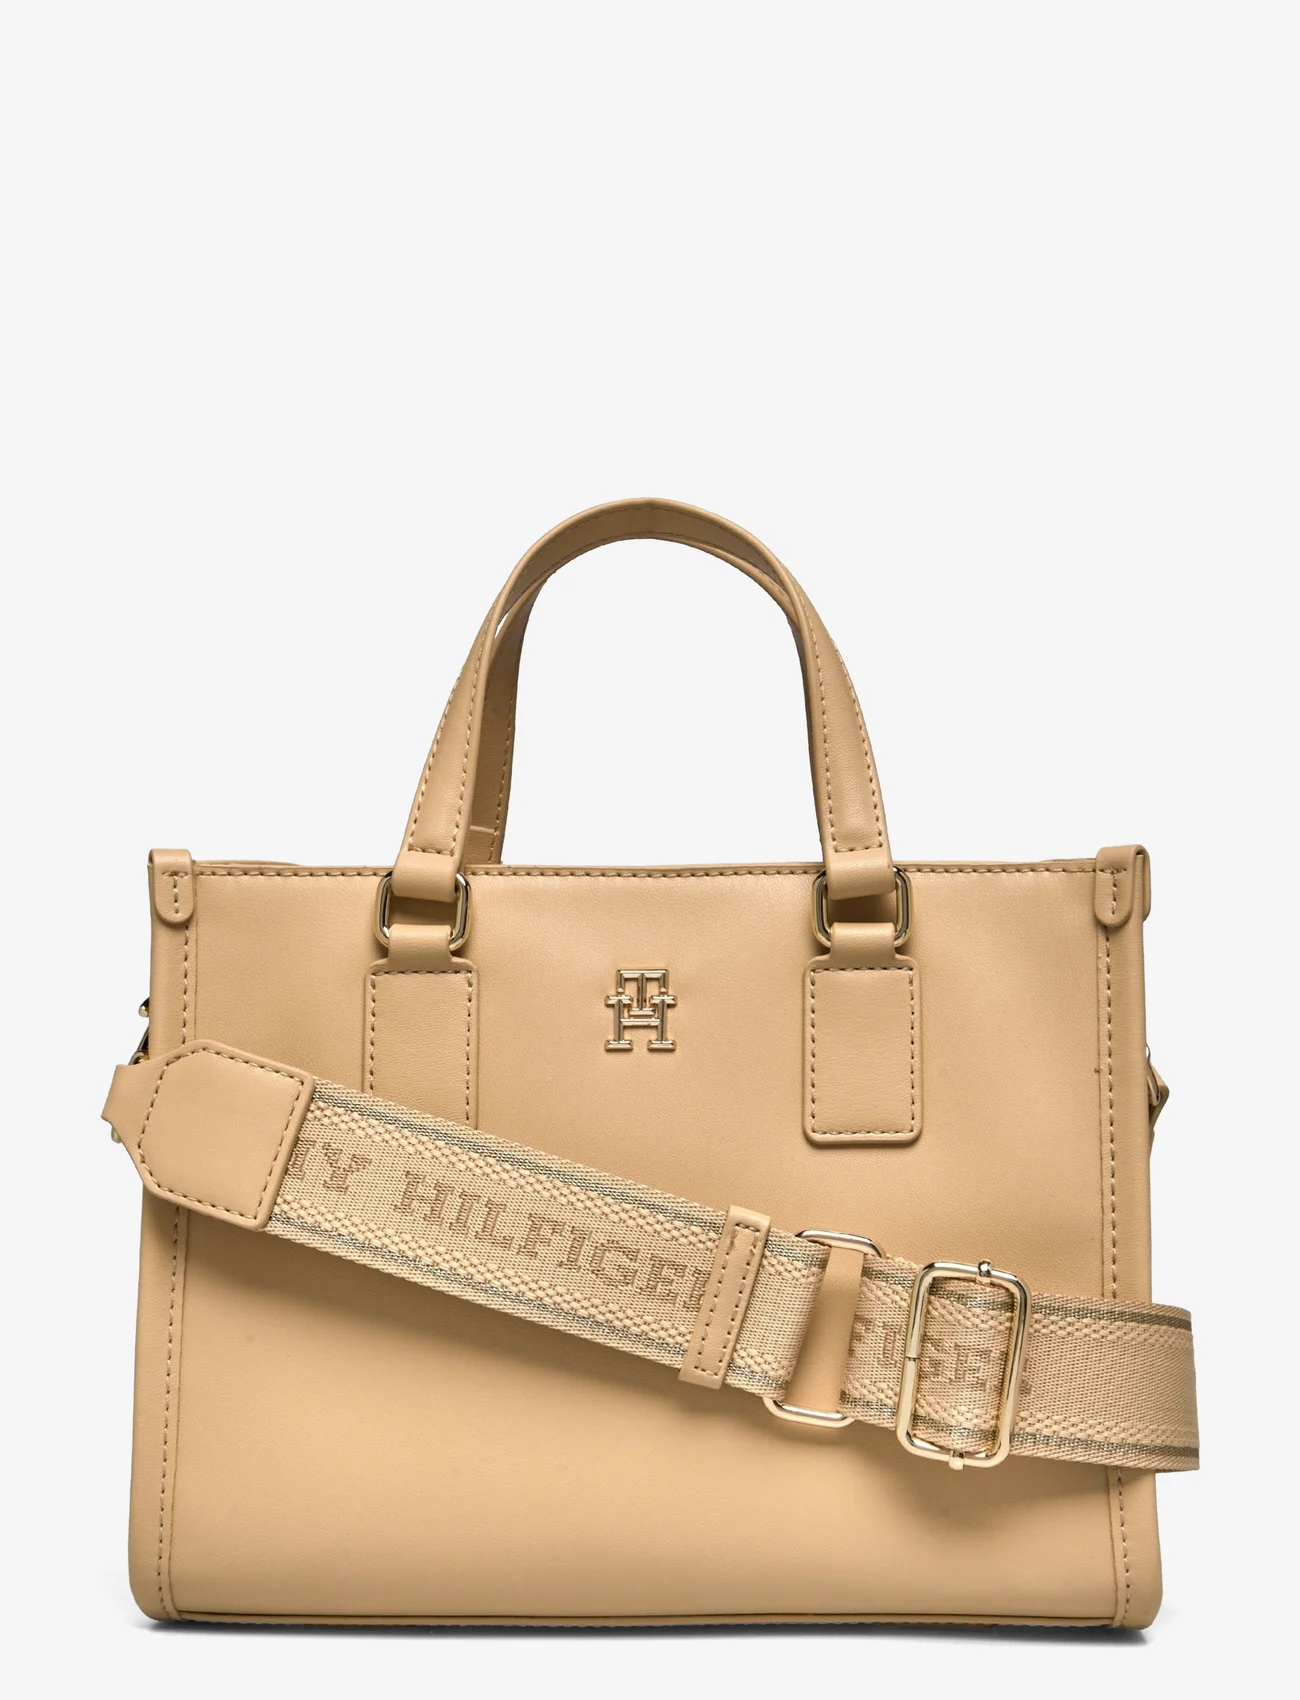 Tommy Hilfiger - TH MONOTYPE MINI TOTE - juhlamuotia outlet-hintaan - harvest wheat - 0